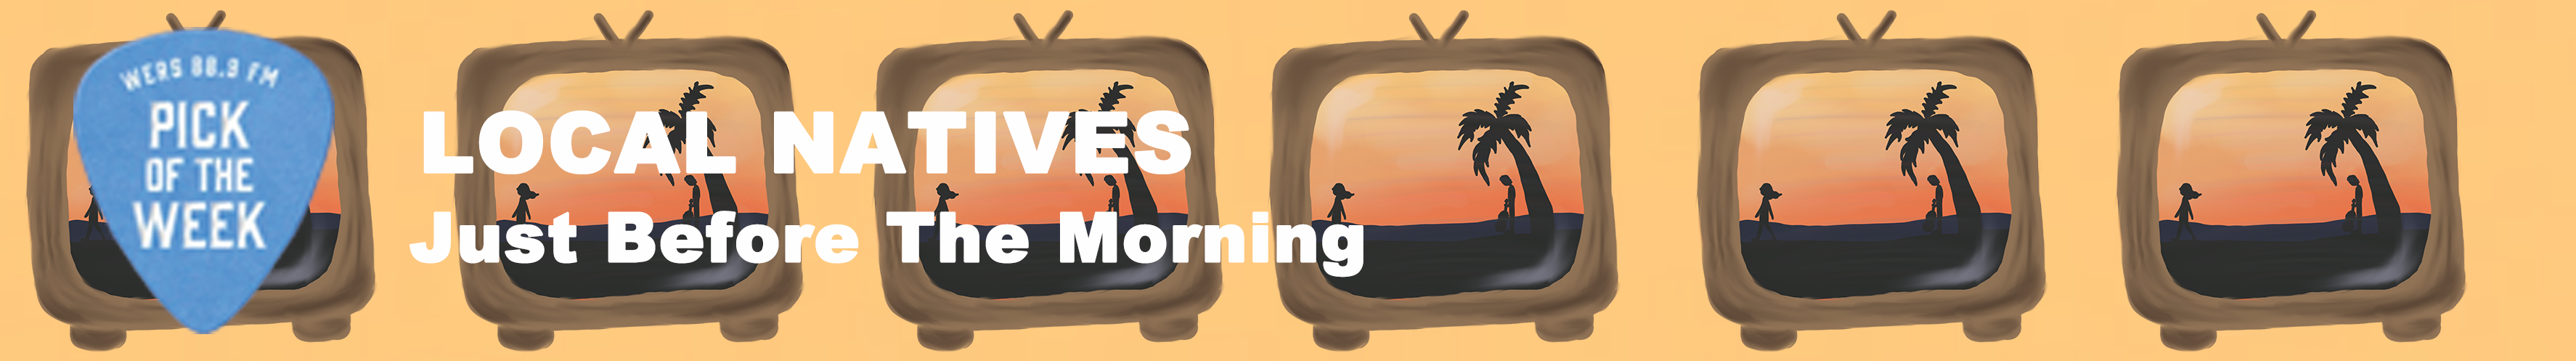 WERS 88.9FM Pick of the Week - Local Natives "Just Before the Morning"